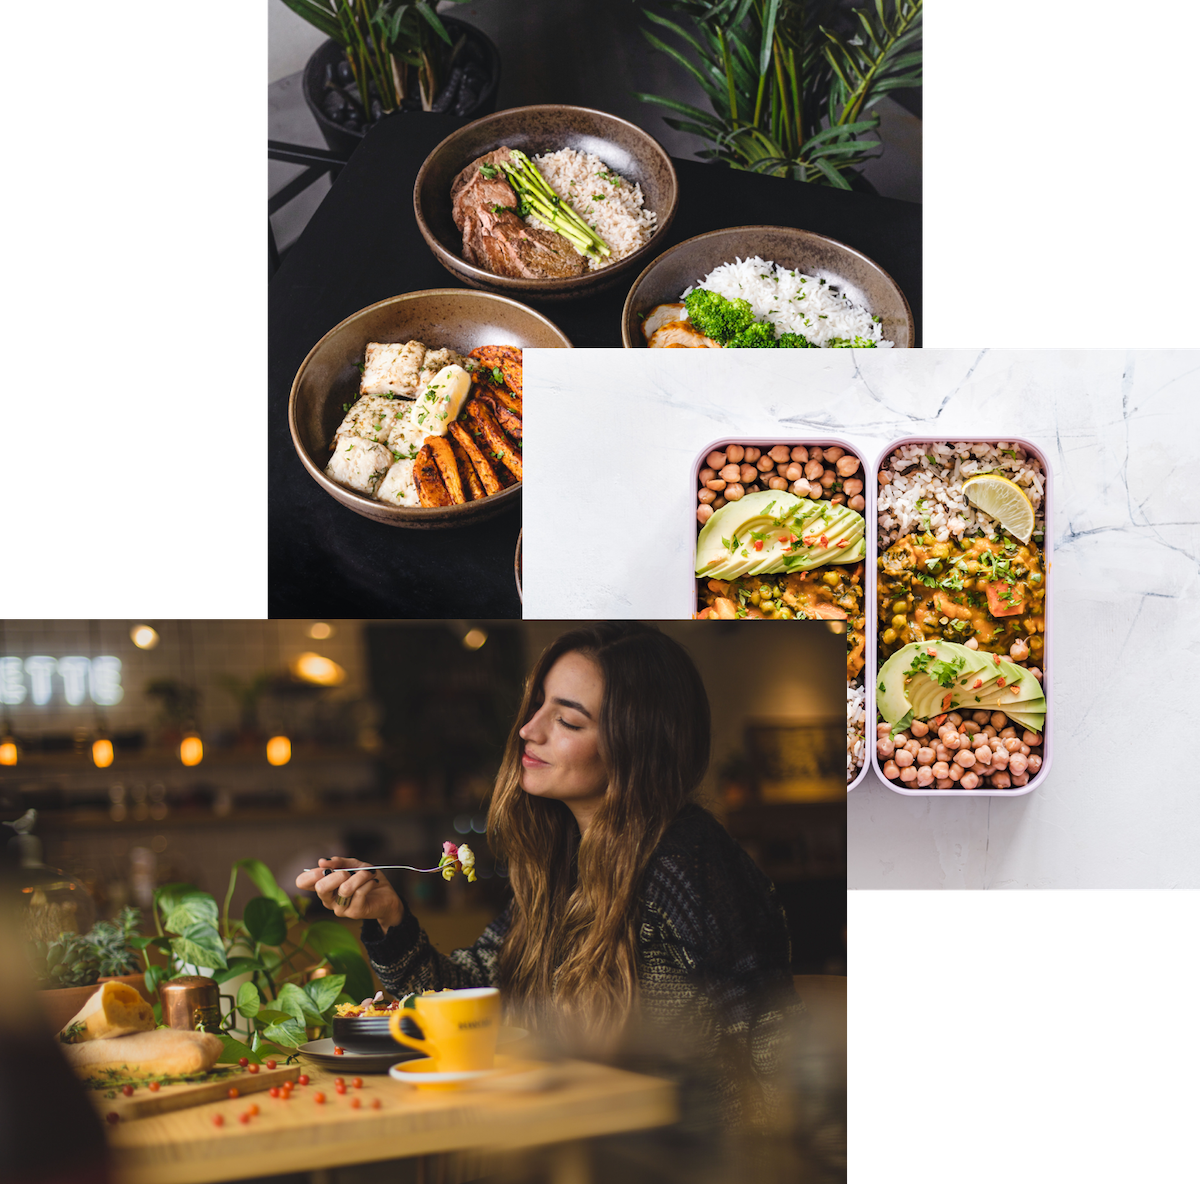 Woman enjoy food, meals in storage container, and food bowls on a table